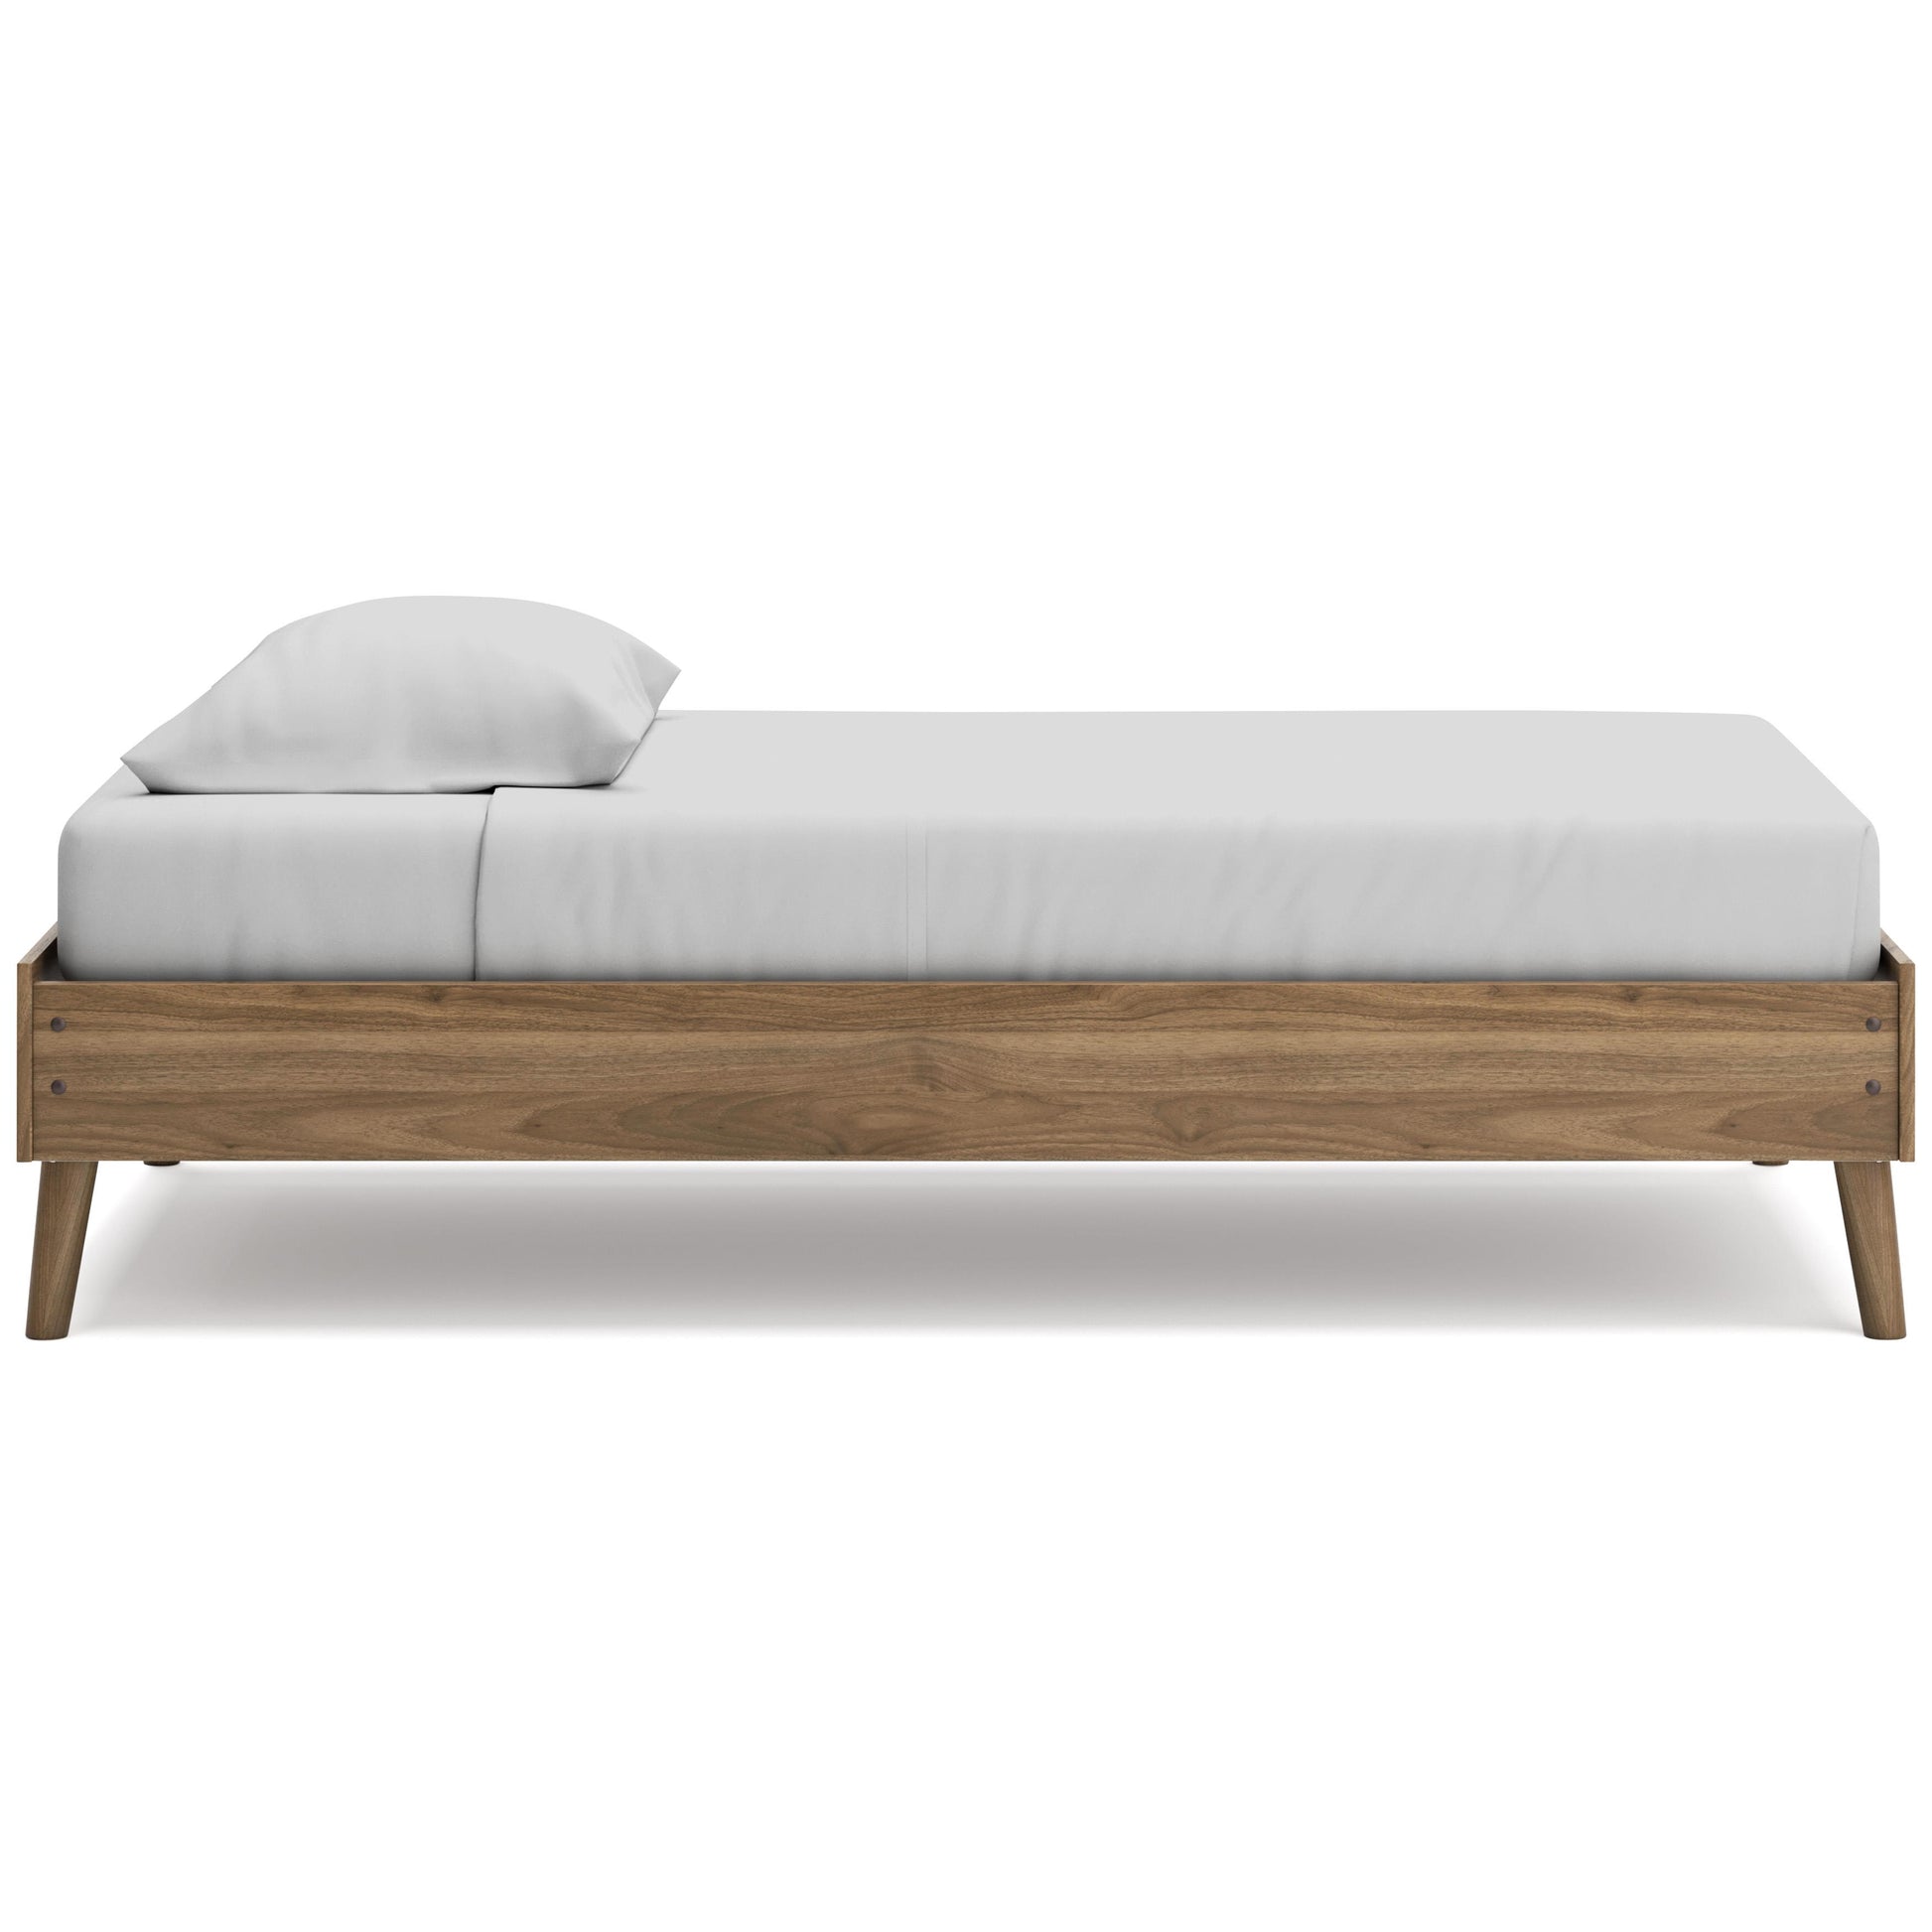 Signature Design by Ashley Kids Beds Bed EB1187-111 IMAGE 3